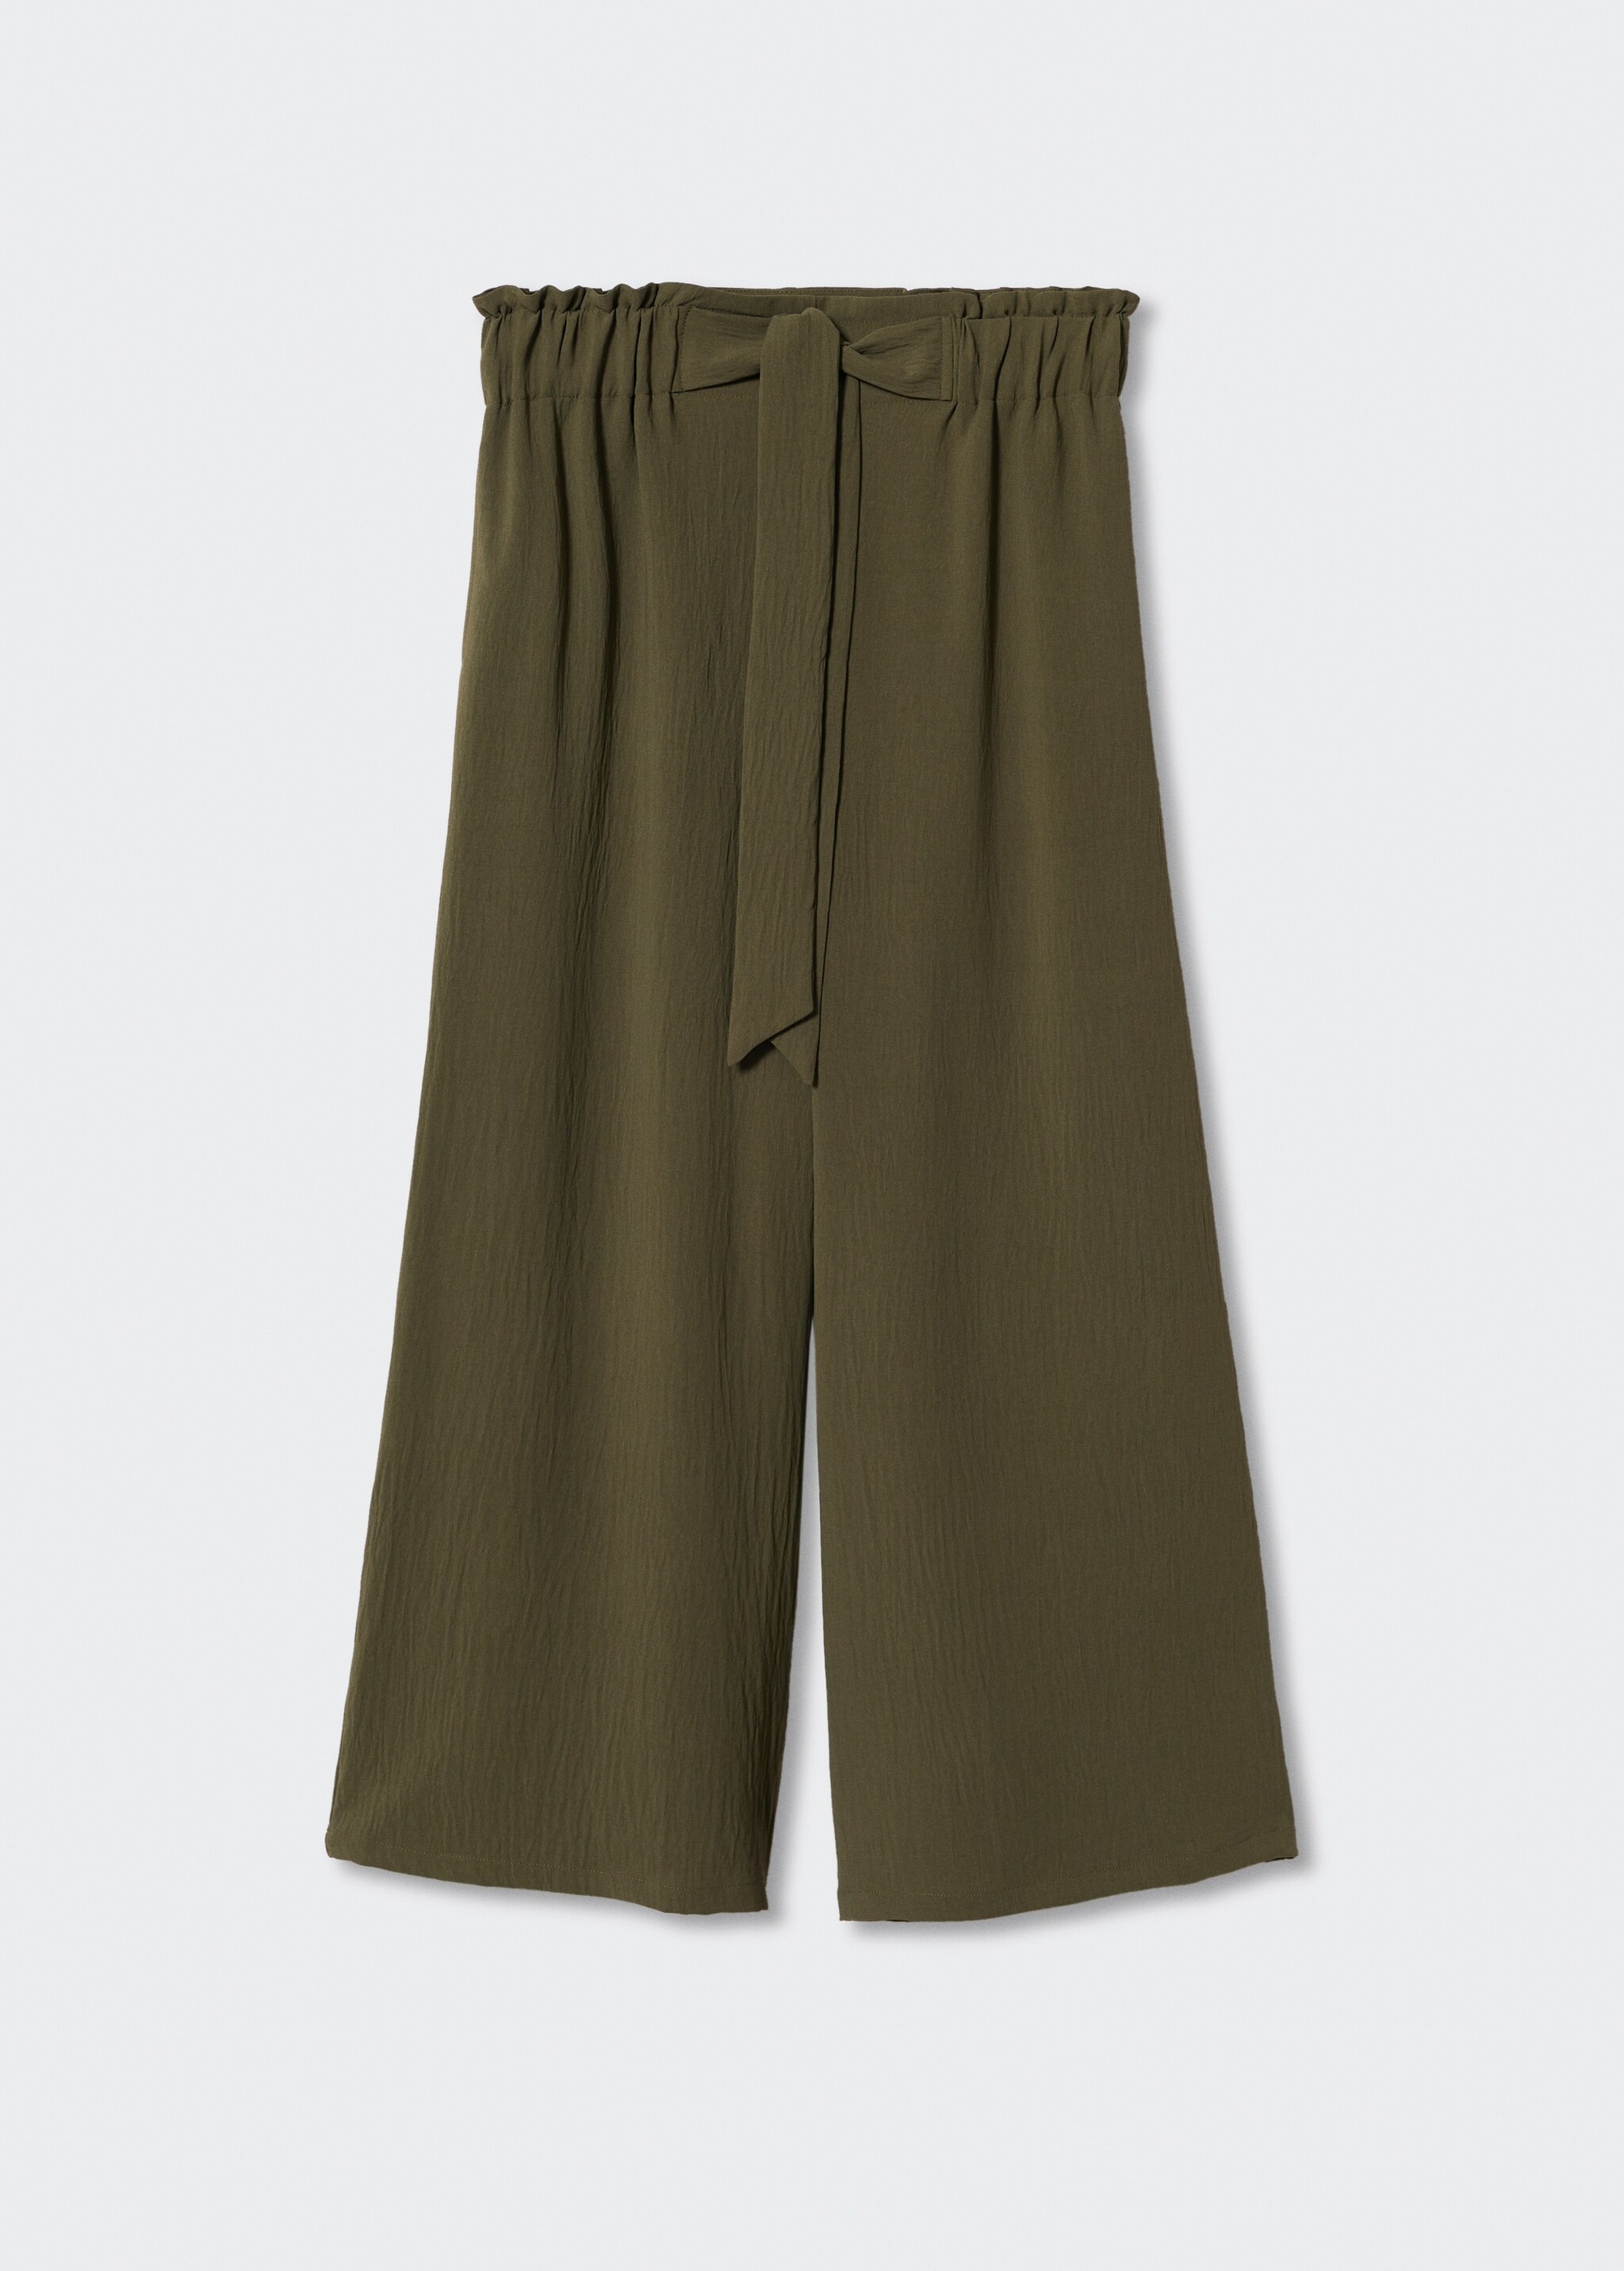 Bow culottes pants - Article without model